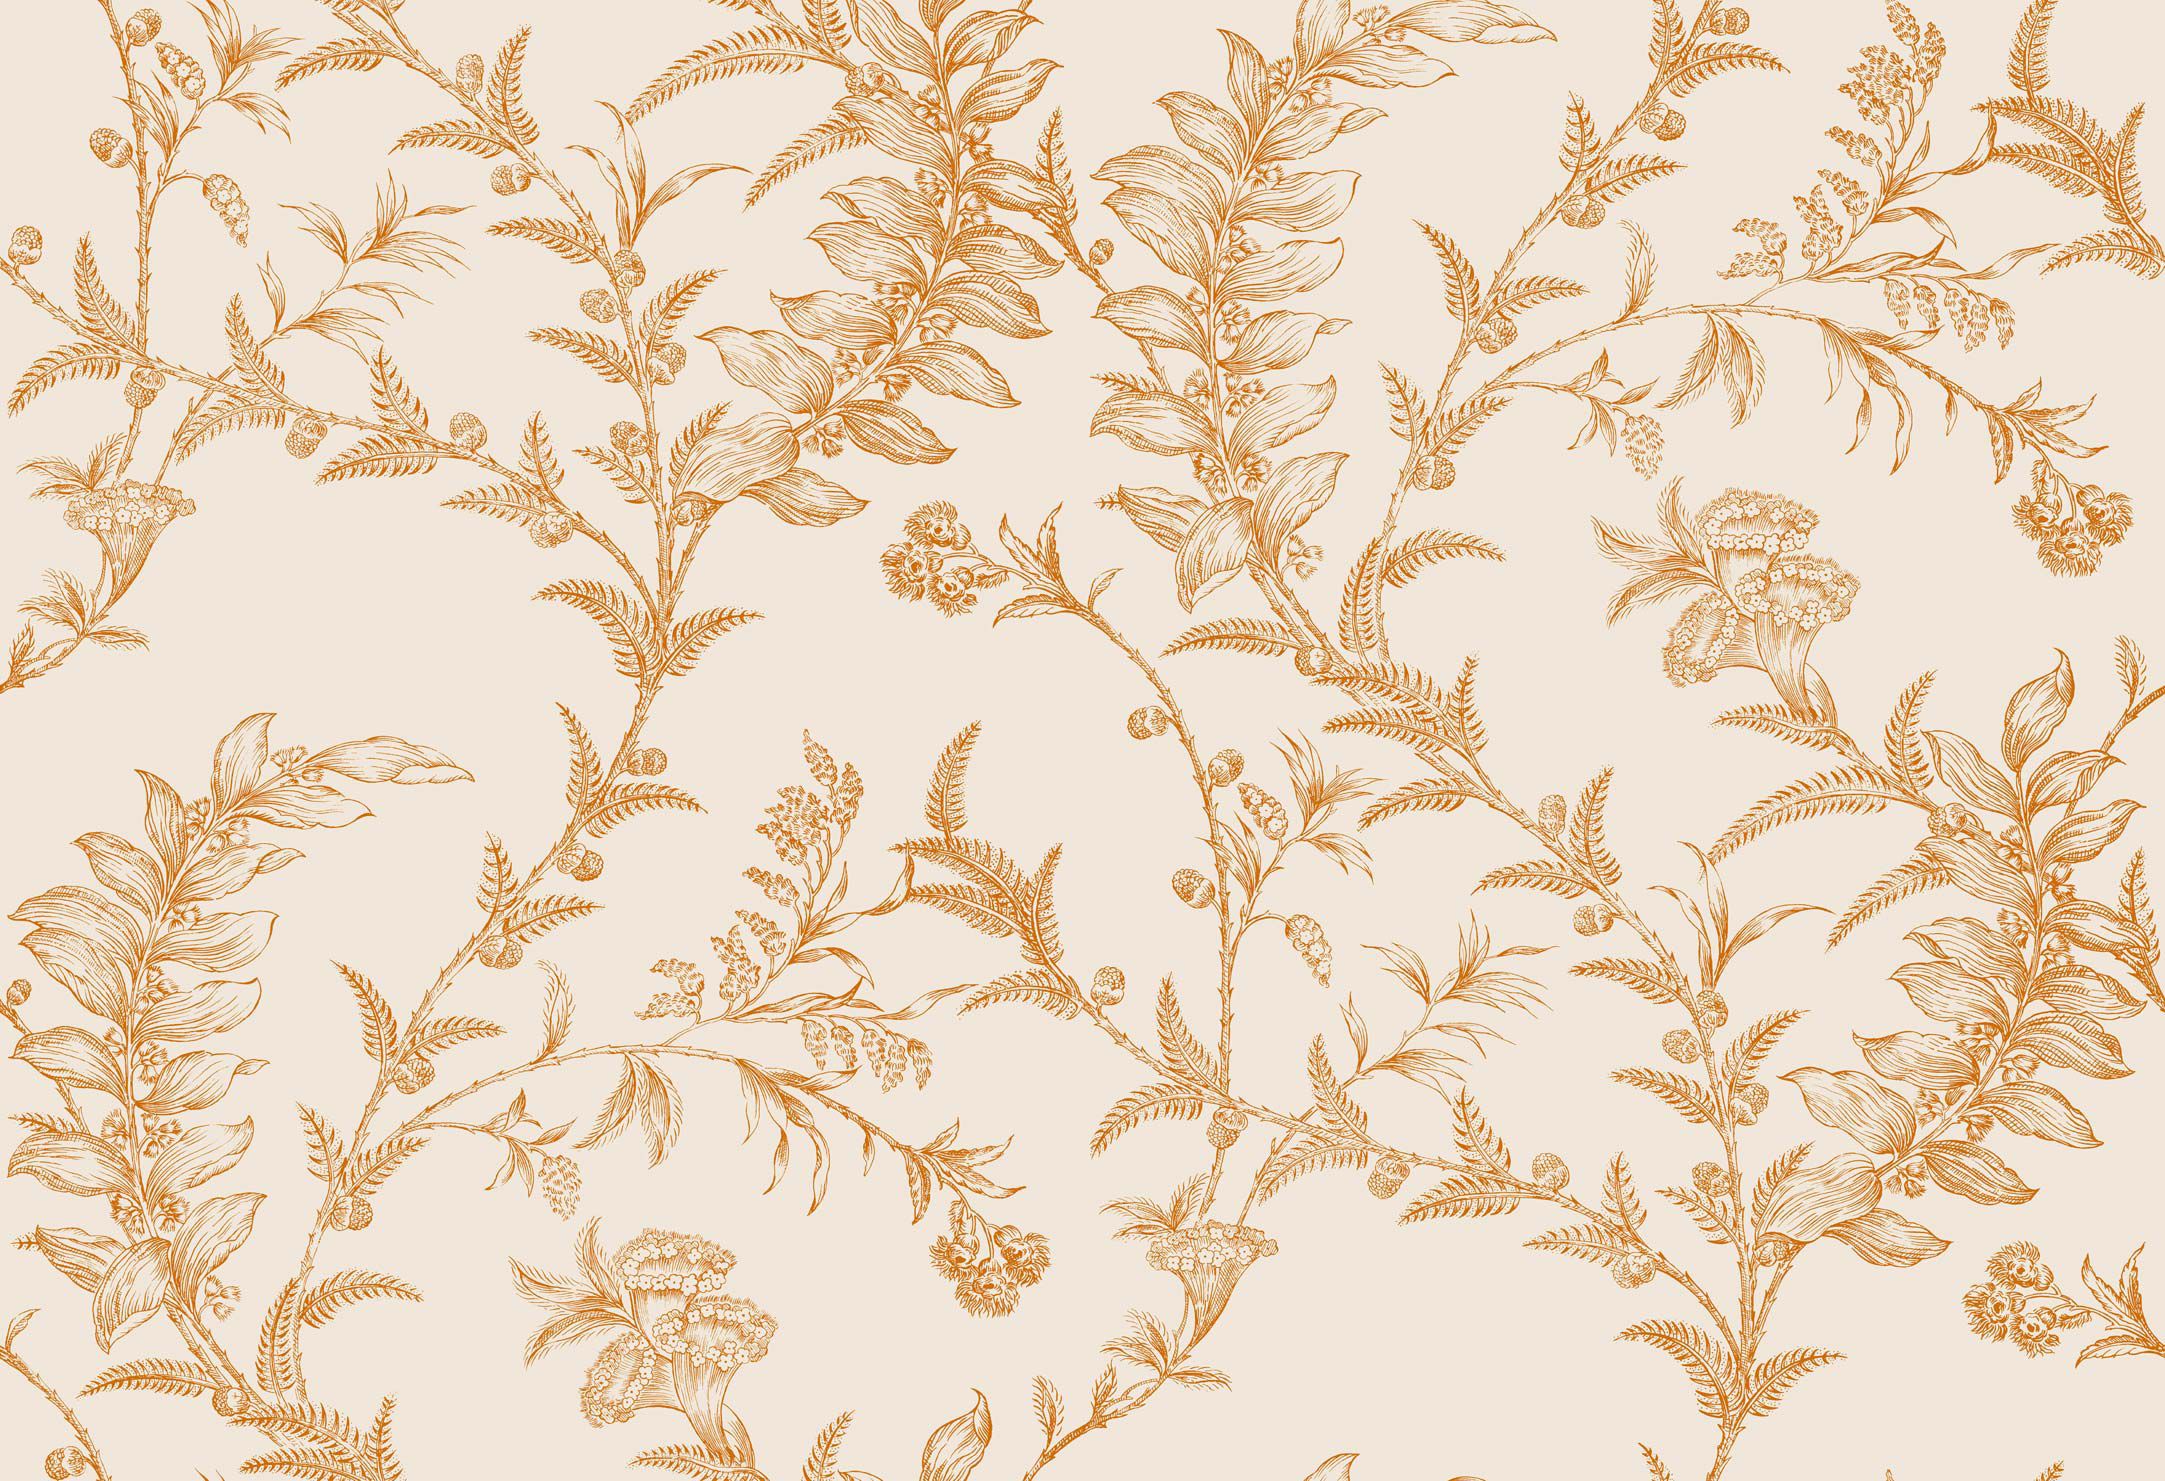 Nature pattern wallpaper / fabric / traditional - ARCHIVE